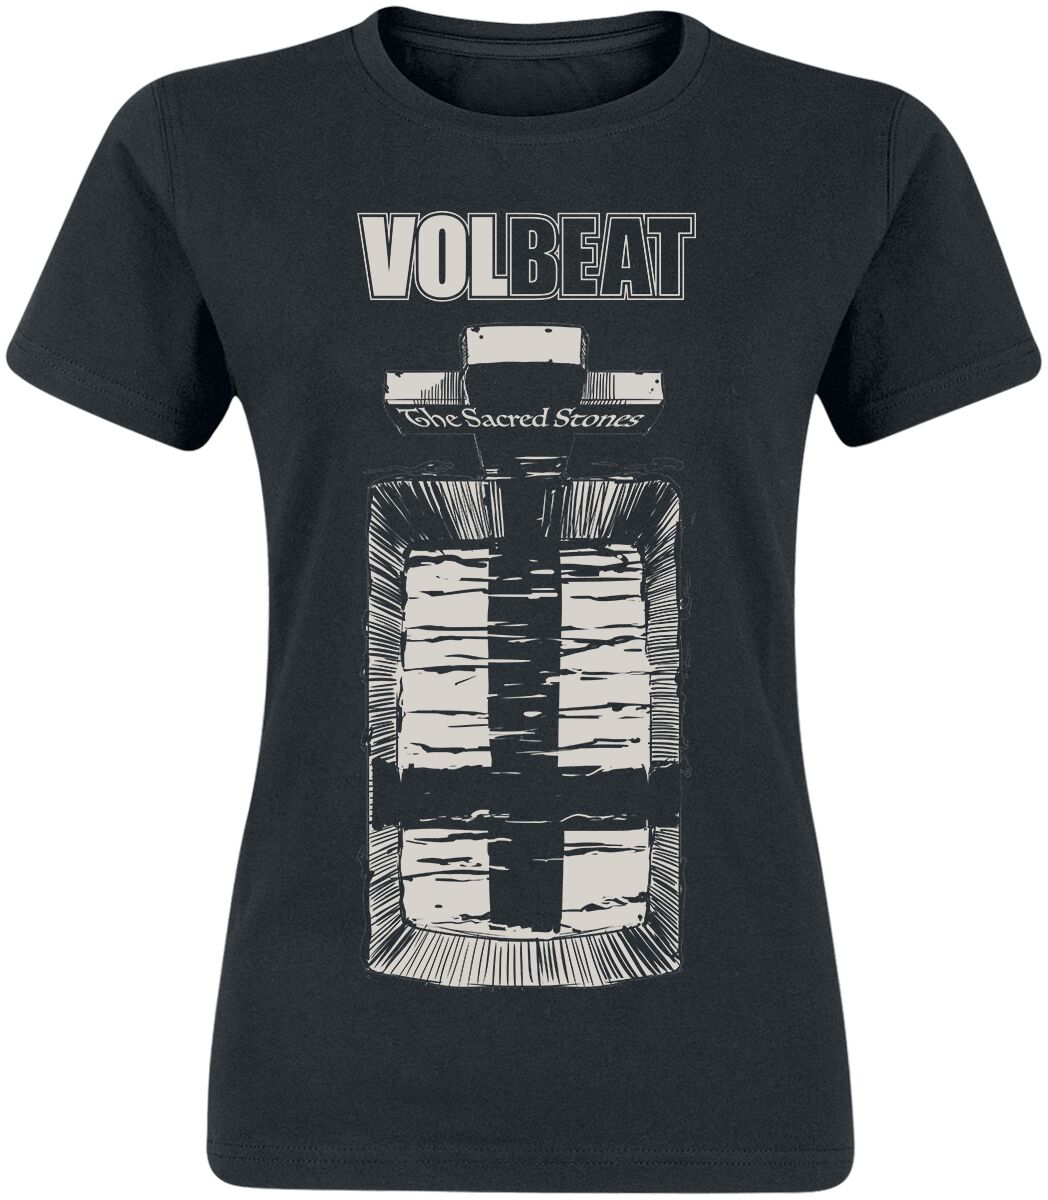 Volbeat The Scared Stones T-Shirt schwarz in S